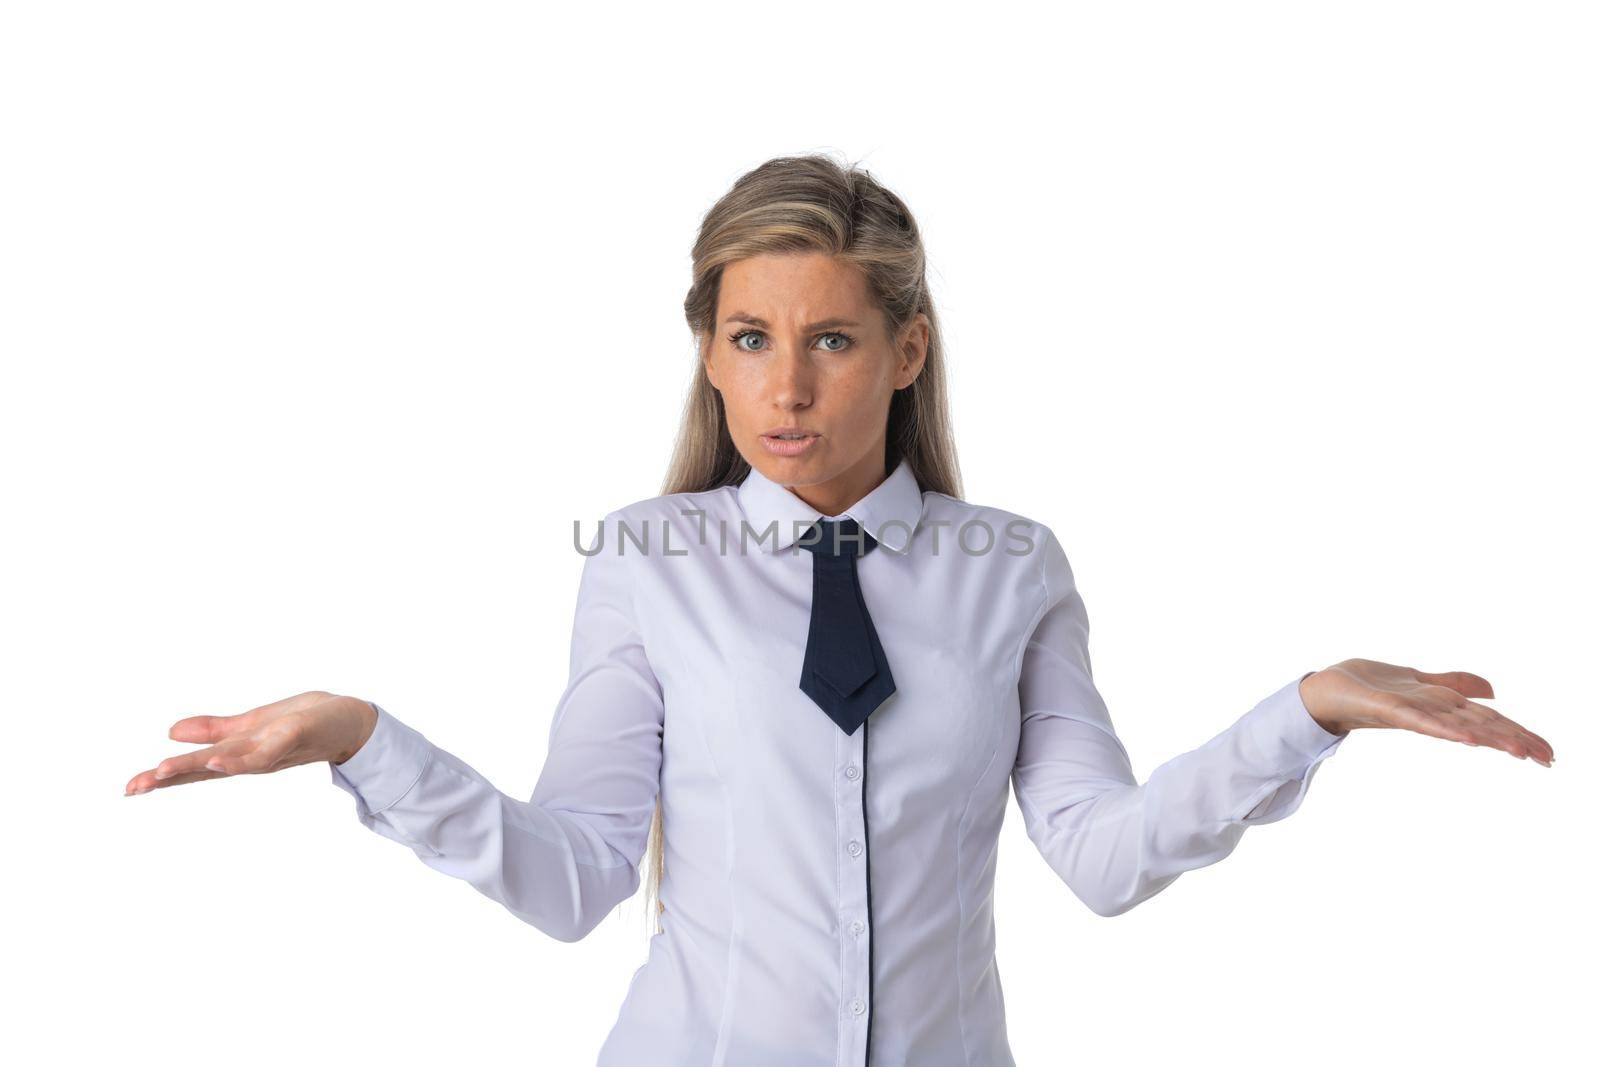 Pretty business woman holding her hands out saying that she does not know isolated over white background. Have no idea concept